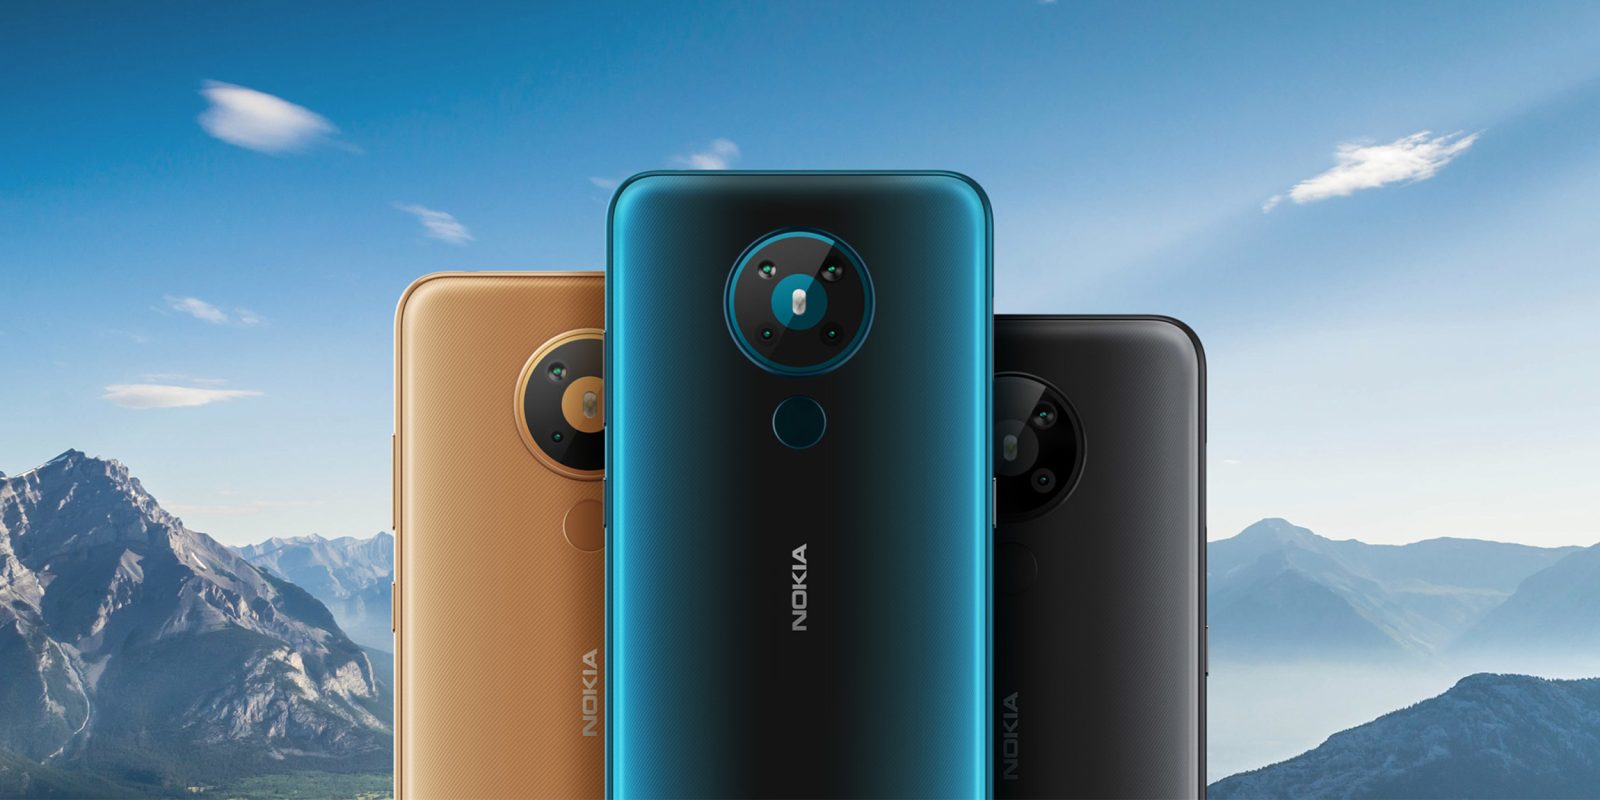 Nokia has launched its Nokia 8.3 5G and Nokia 5.3, know its features